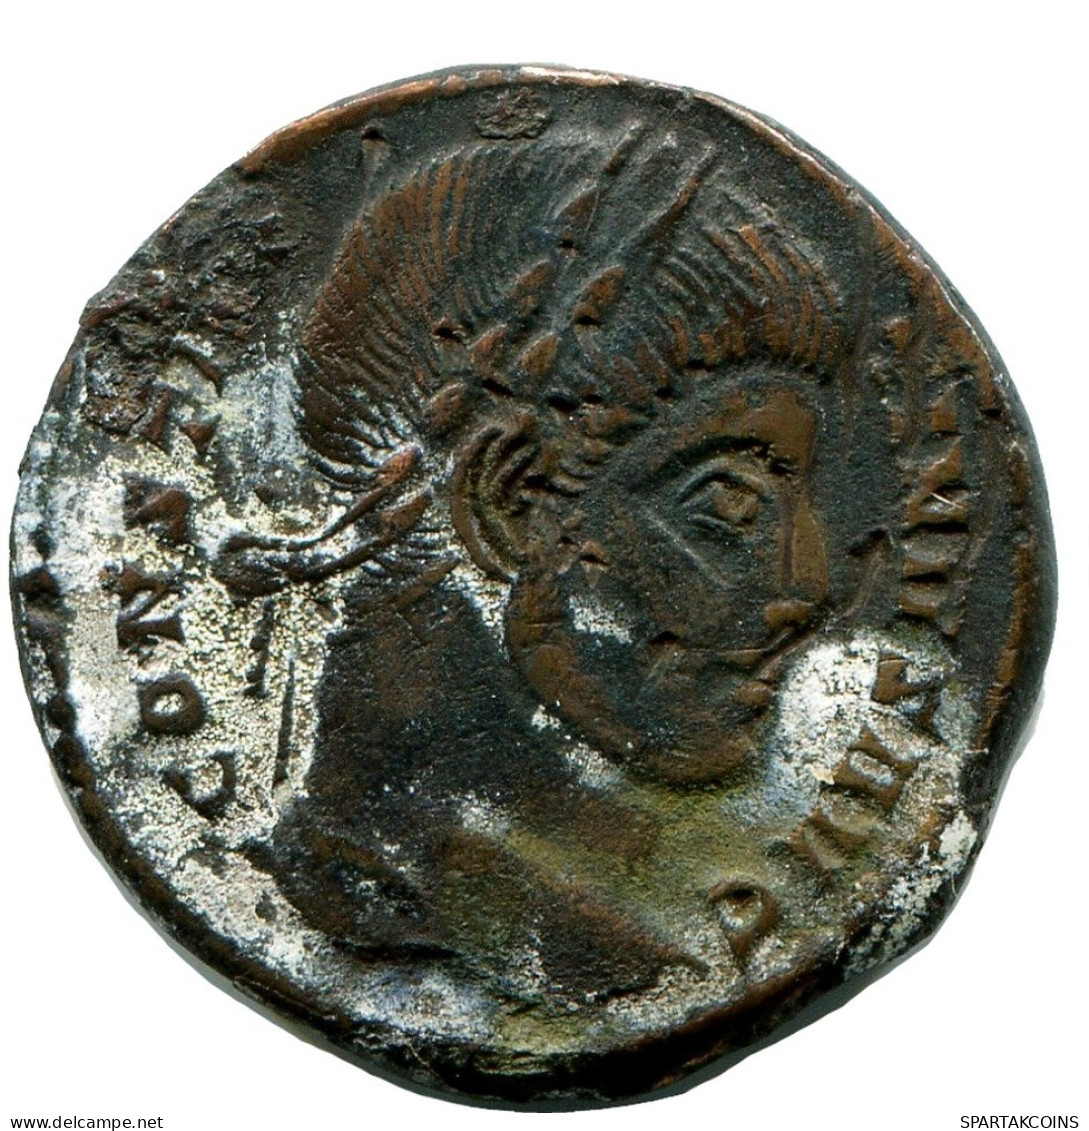 CONSTANTINE I MINTED IN TICINUM FROM THE ROYAL ONTARIO MUSEUM #ANC11079.14.F.A - The Christian Empire (307 AD To 363 AD)